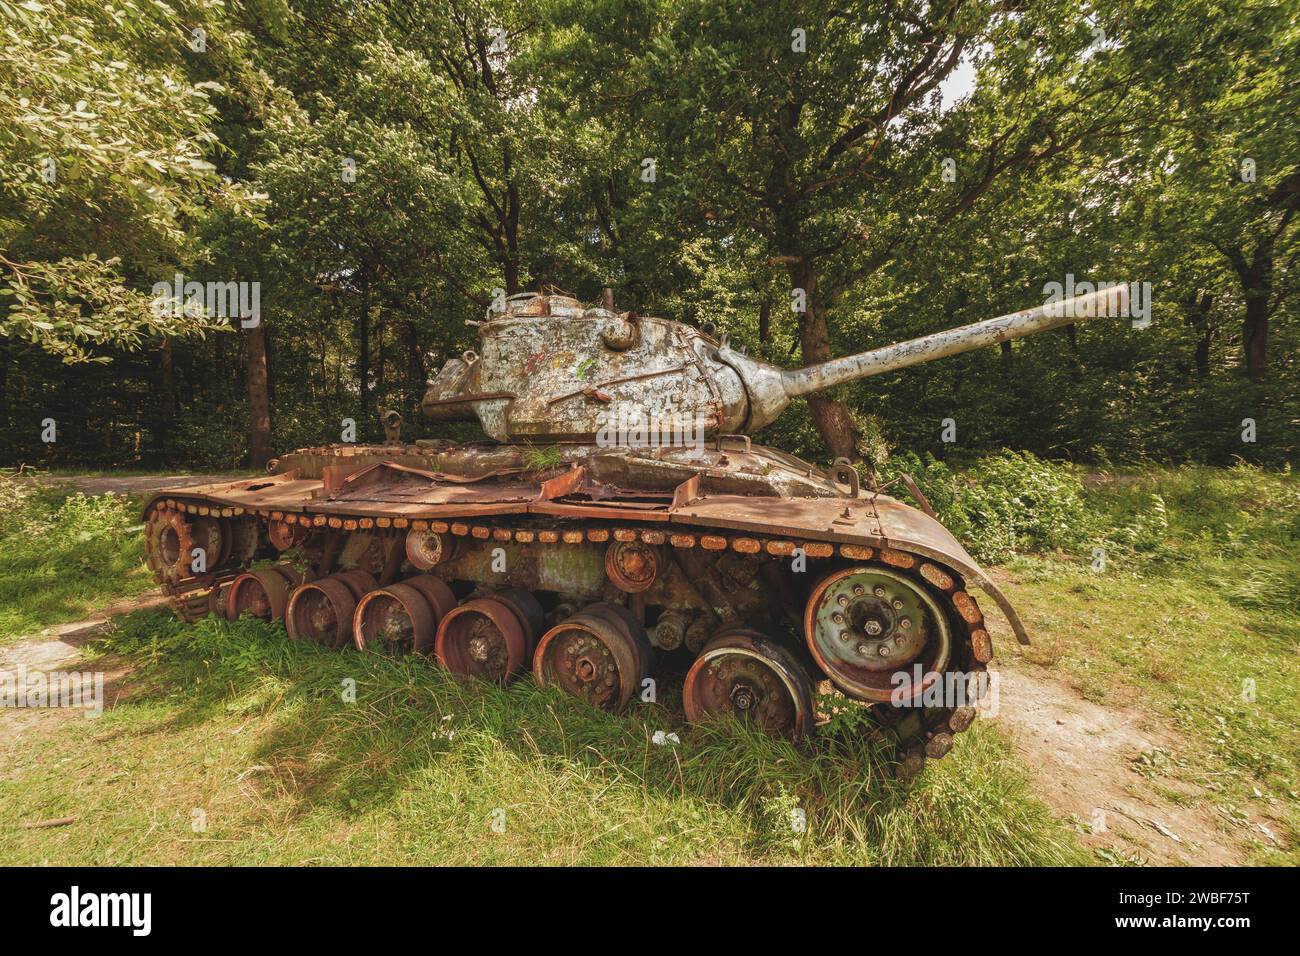 An old, rusty tank surrounded by green vegetation in the forest, M47 Patton, Lost Place, Brander Wald, Aachen, North Rhine-Westphalia, Germany Stock Photo